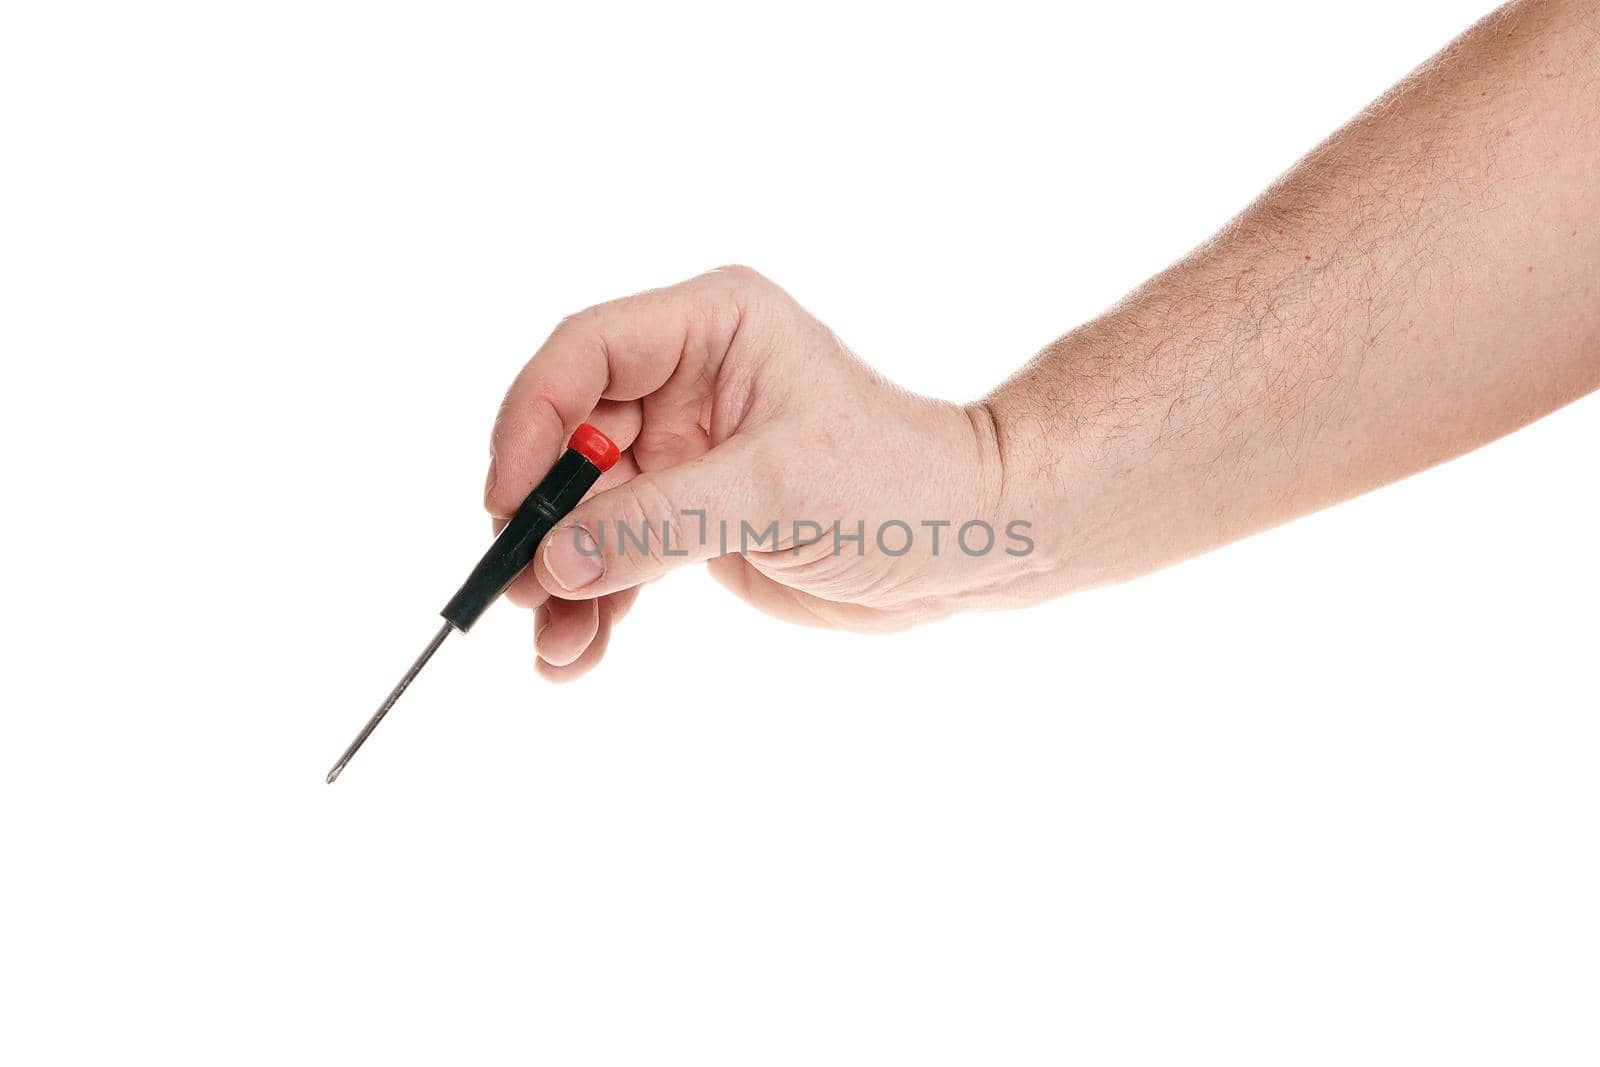 Hand holds a screwdriver on a white background, a template for designers. Close up